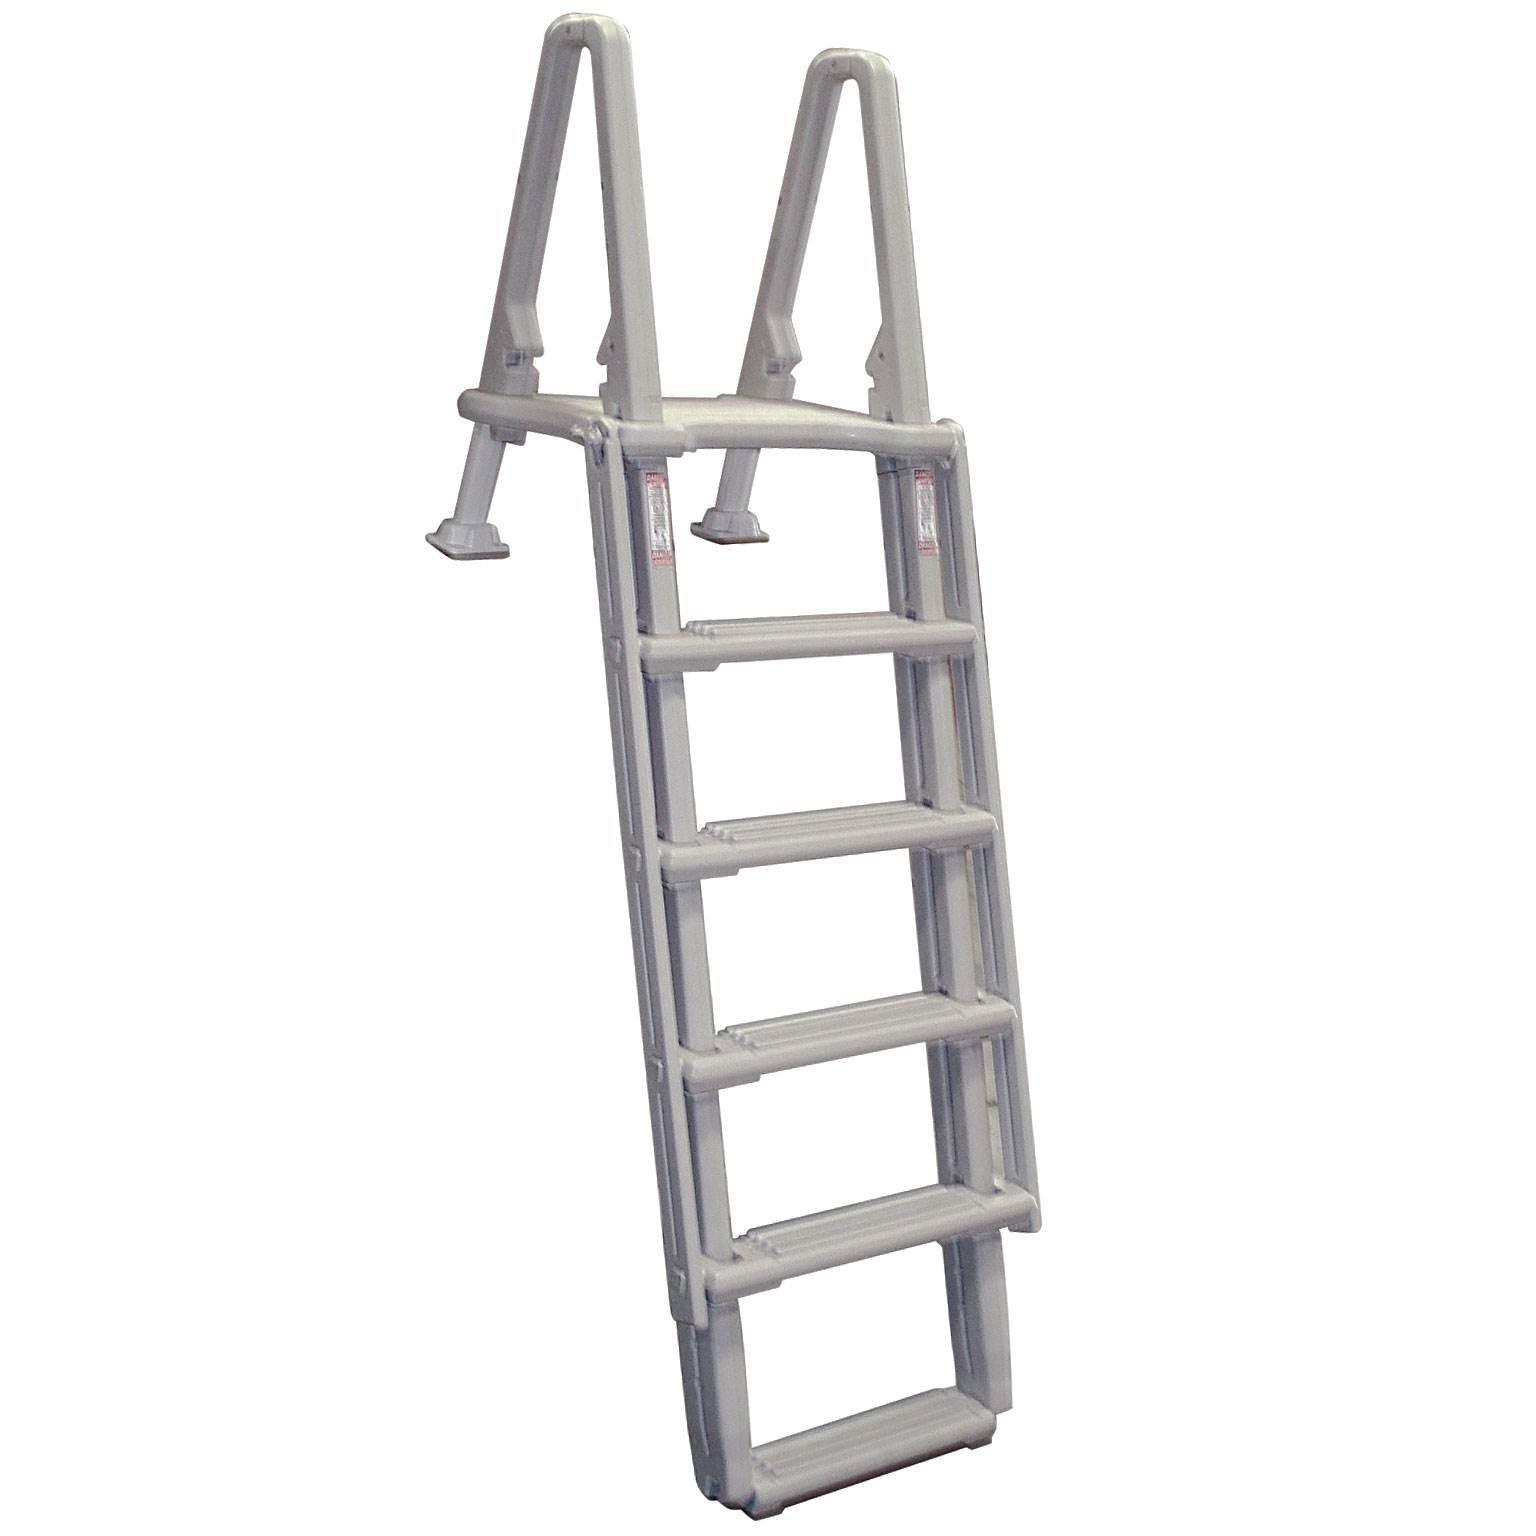 Walmart Pool Ladders Above Ground
 Confer Ground 8100X Swimming Pool Ladders Outside